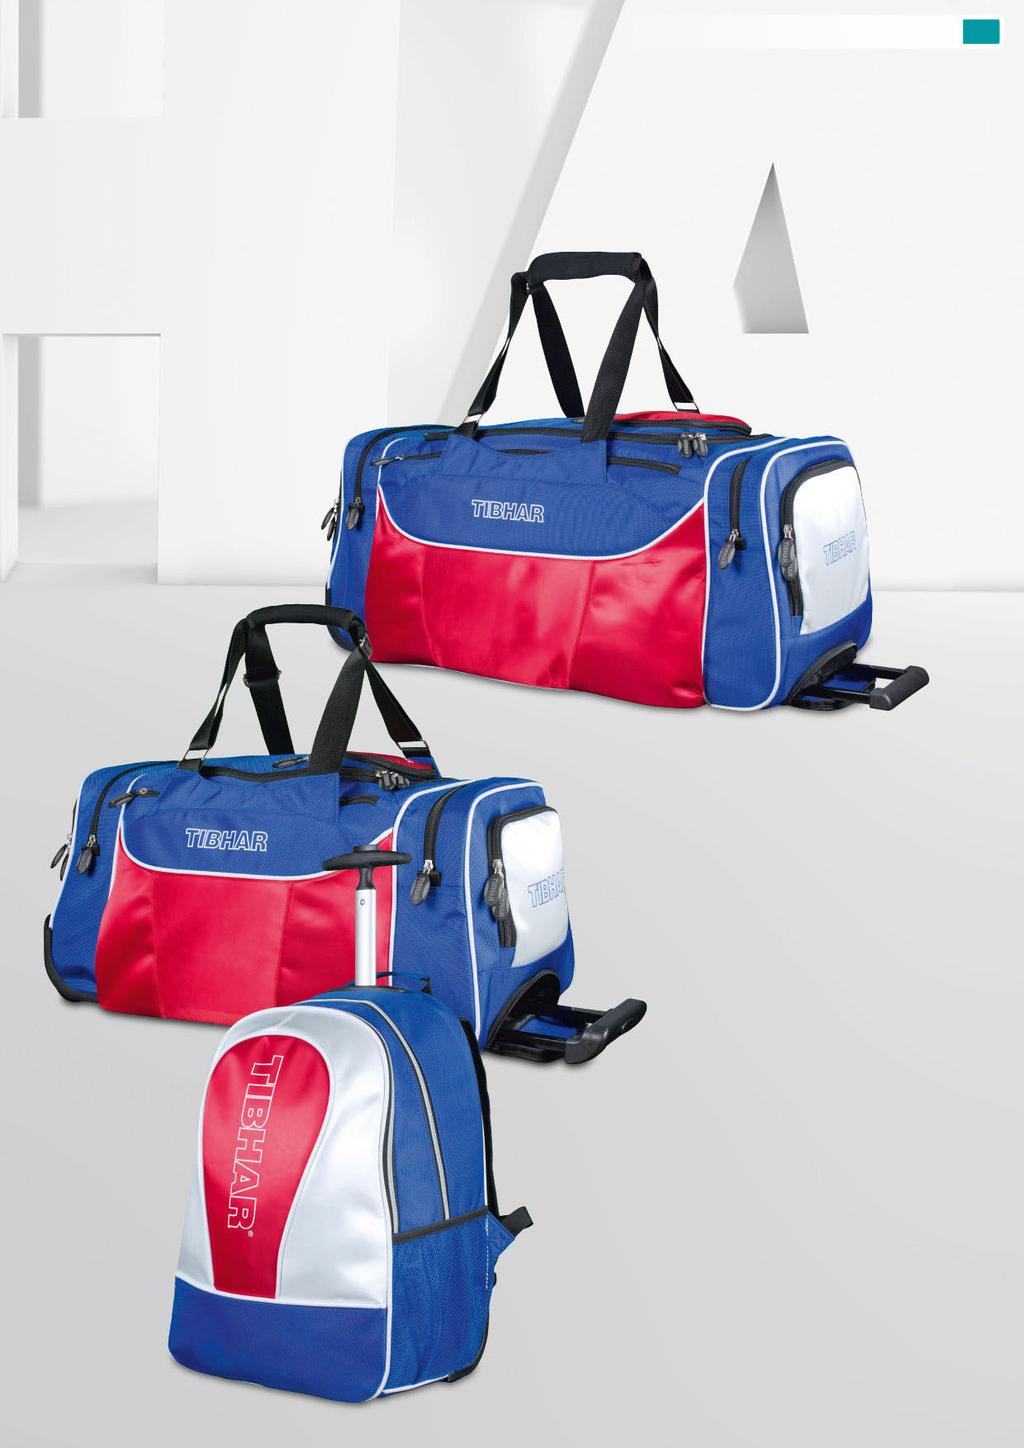 TREND 97 ROLLERBAG TREND LARGE Practical sports bag on wheels with telescopic grip Spacious main compartment and many additional pockets Robust two-way zippers Composition: Polyester 1680 D /